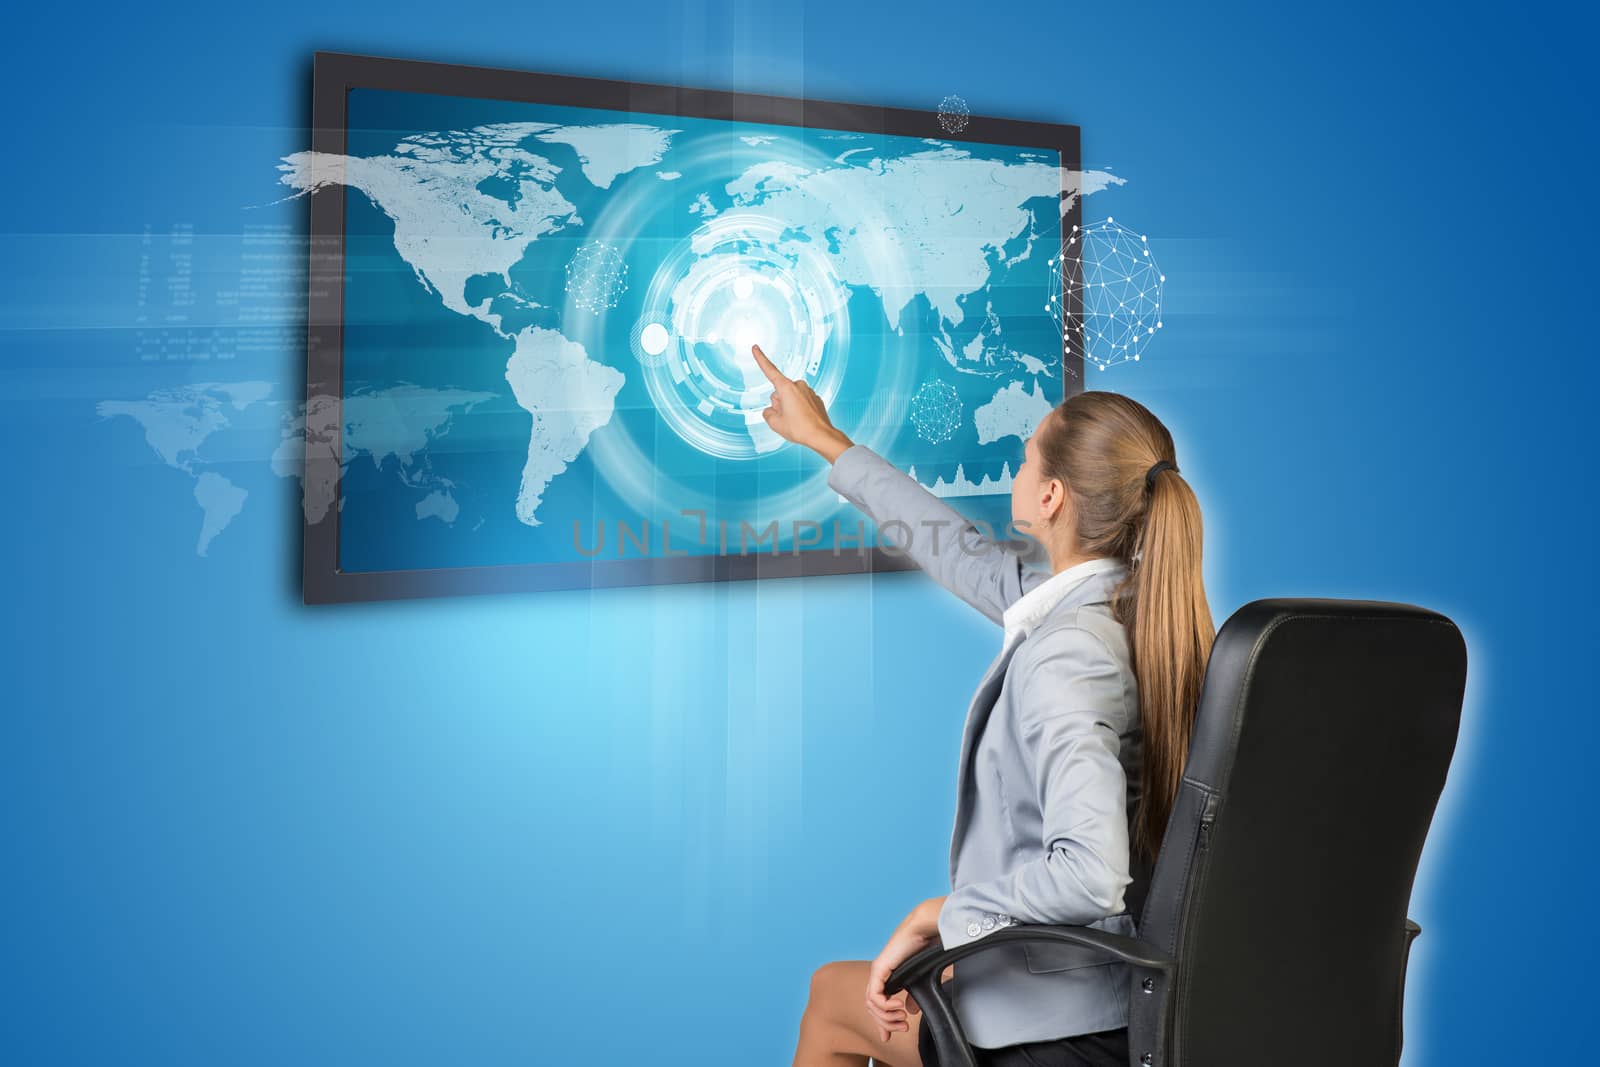 Businesswoman operating touch screen interface by cherezoff